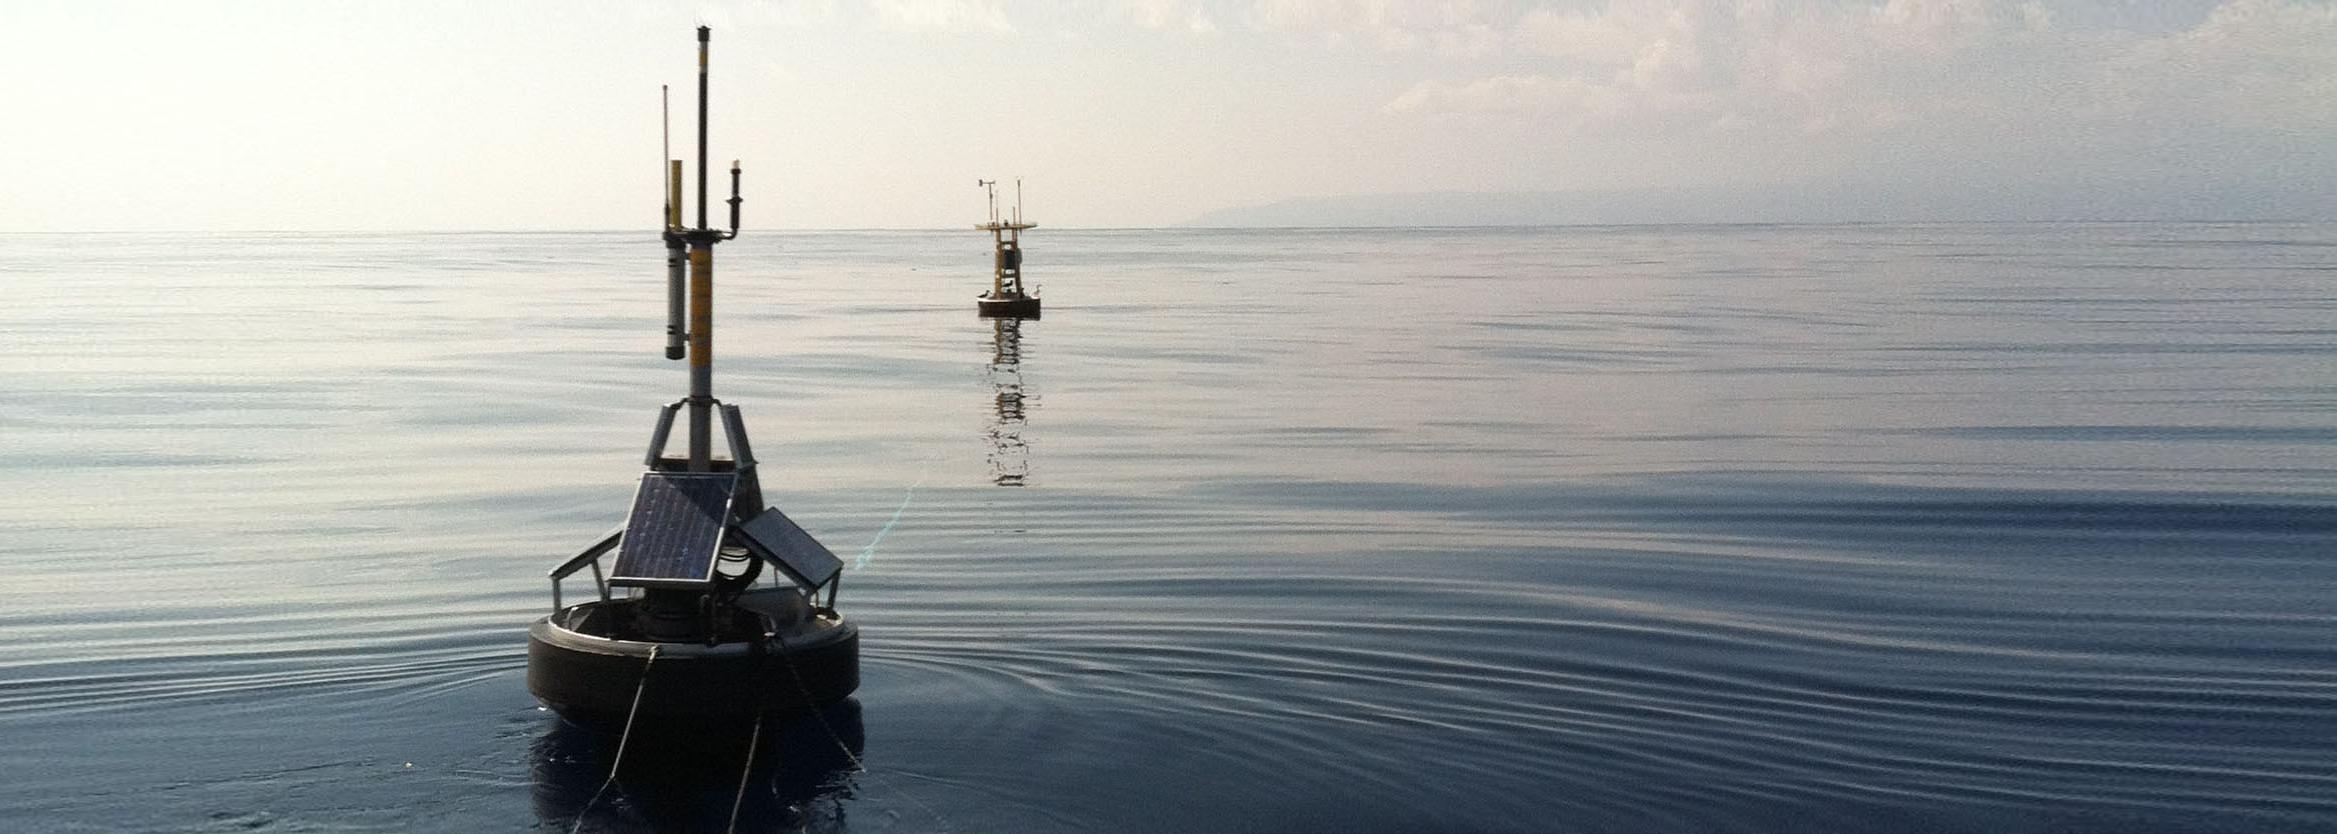 A solar powered buoy floating at sea